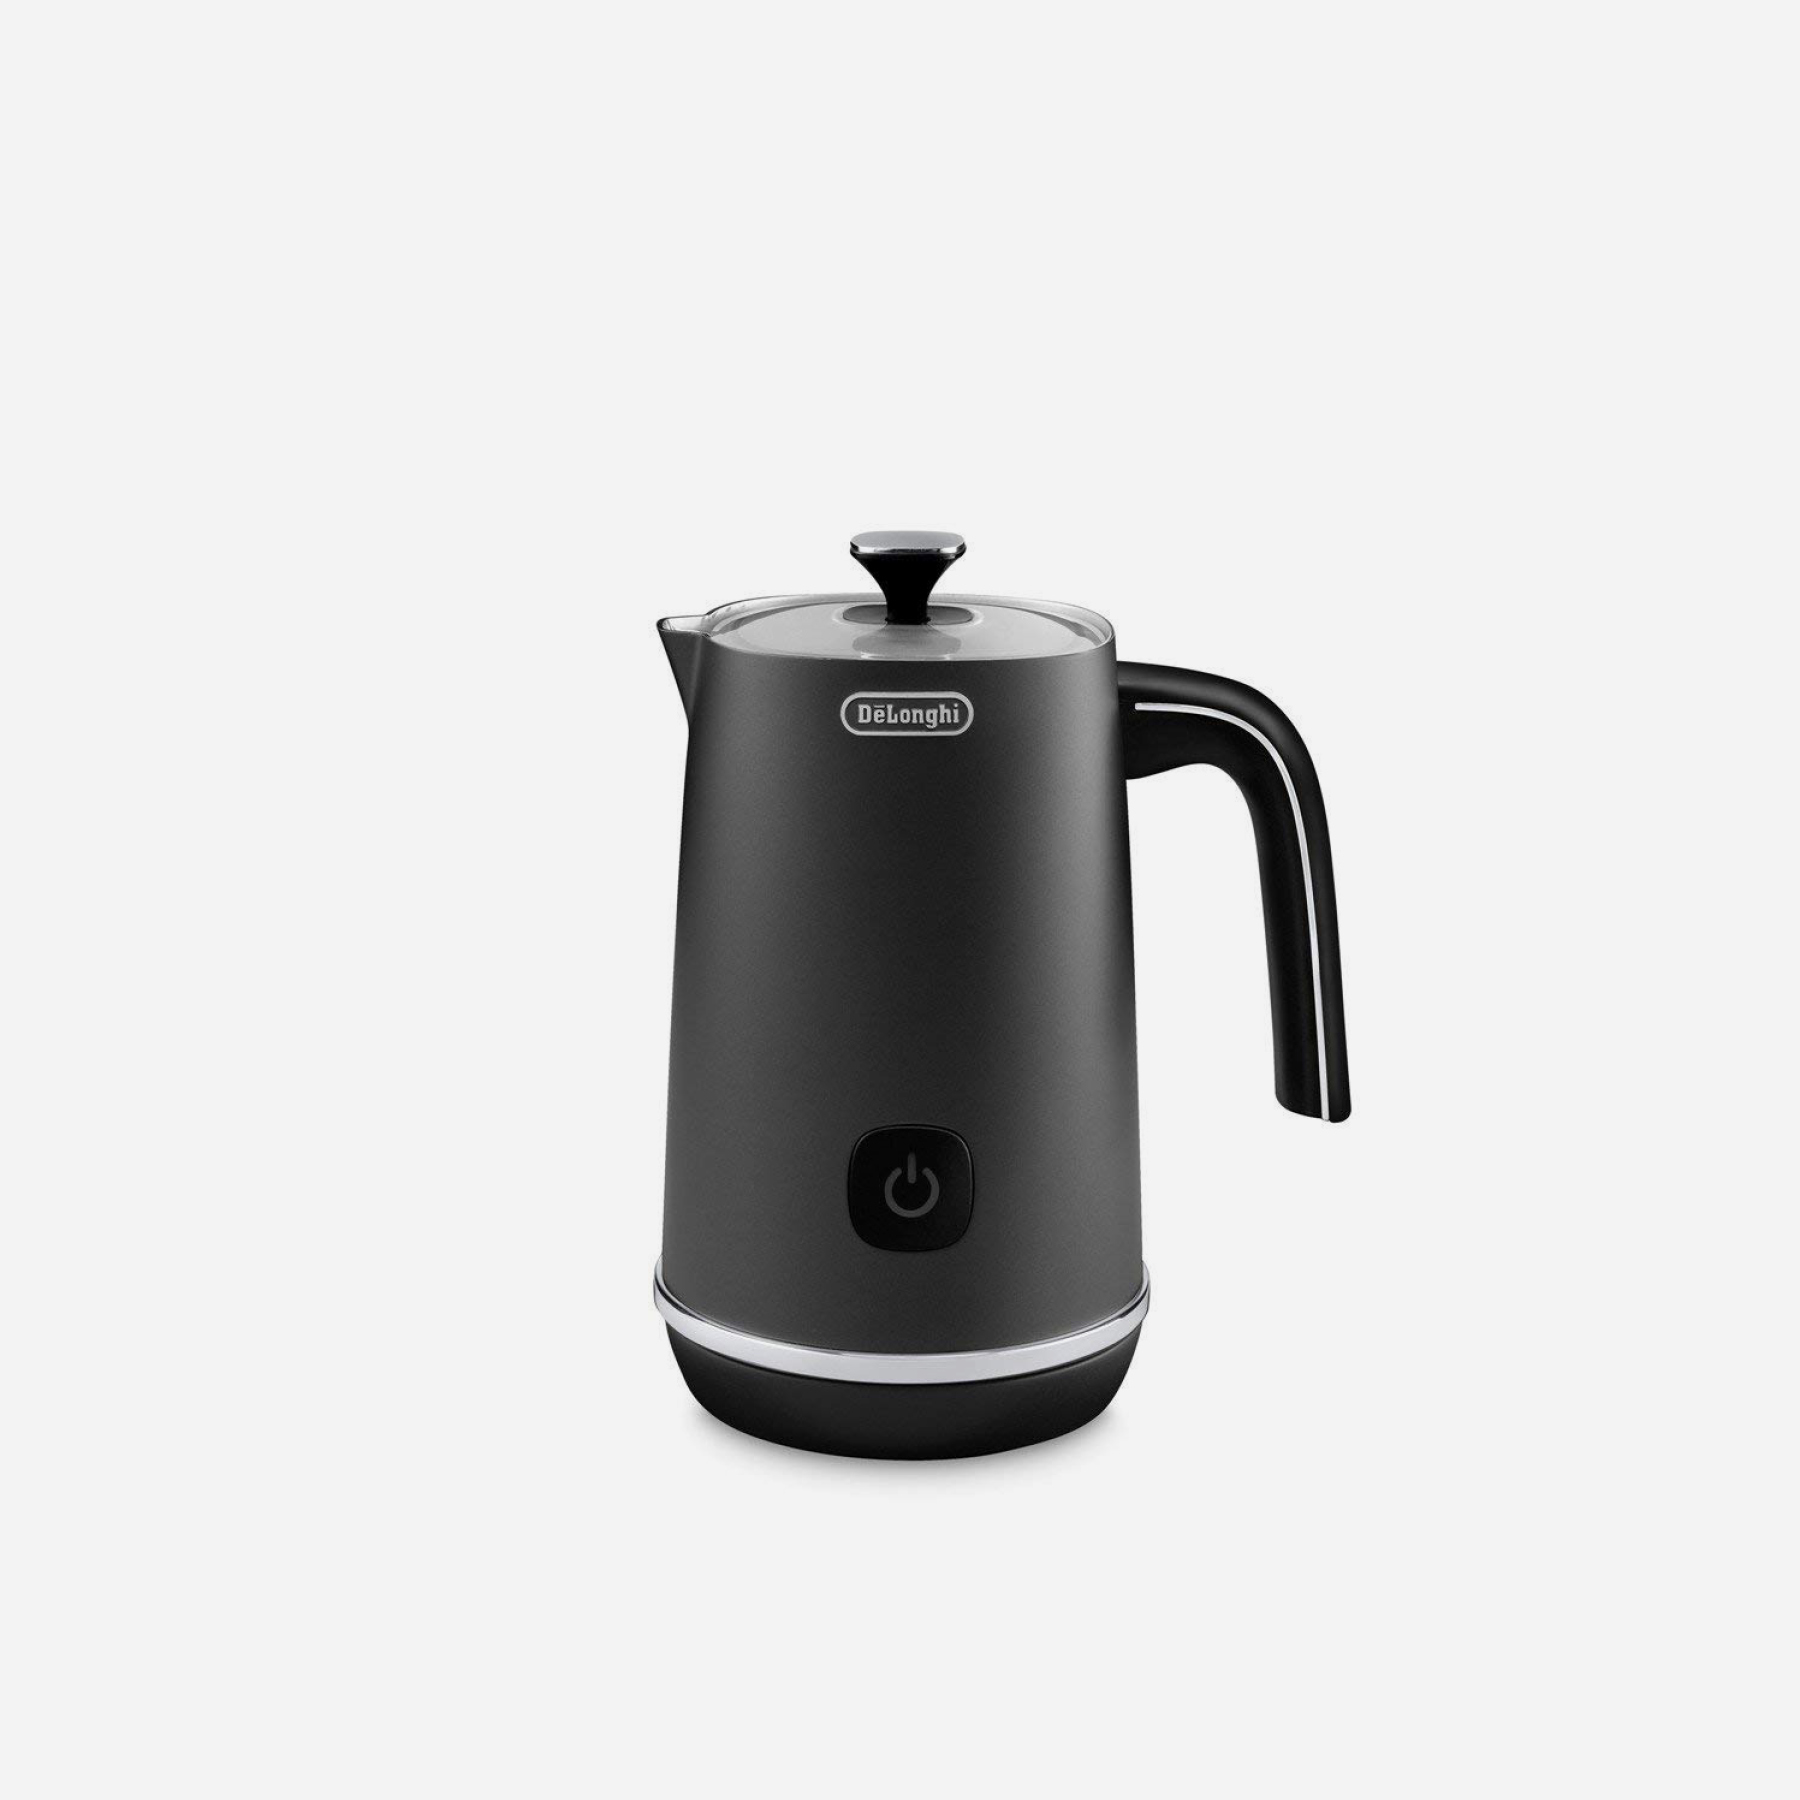 ALL-SORTS-OF-DE-LONGHI-MILK-FROTHER